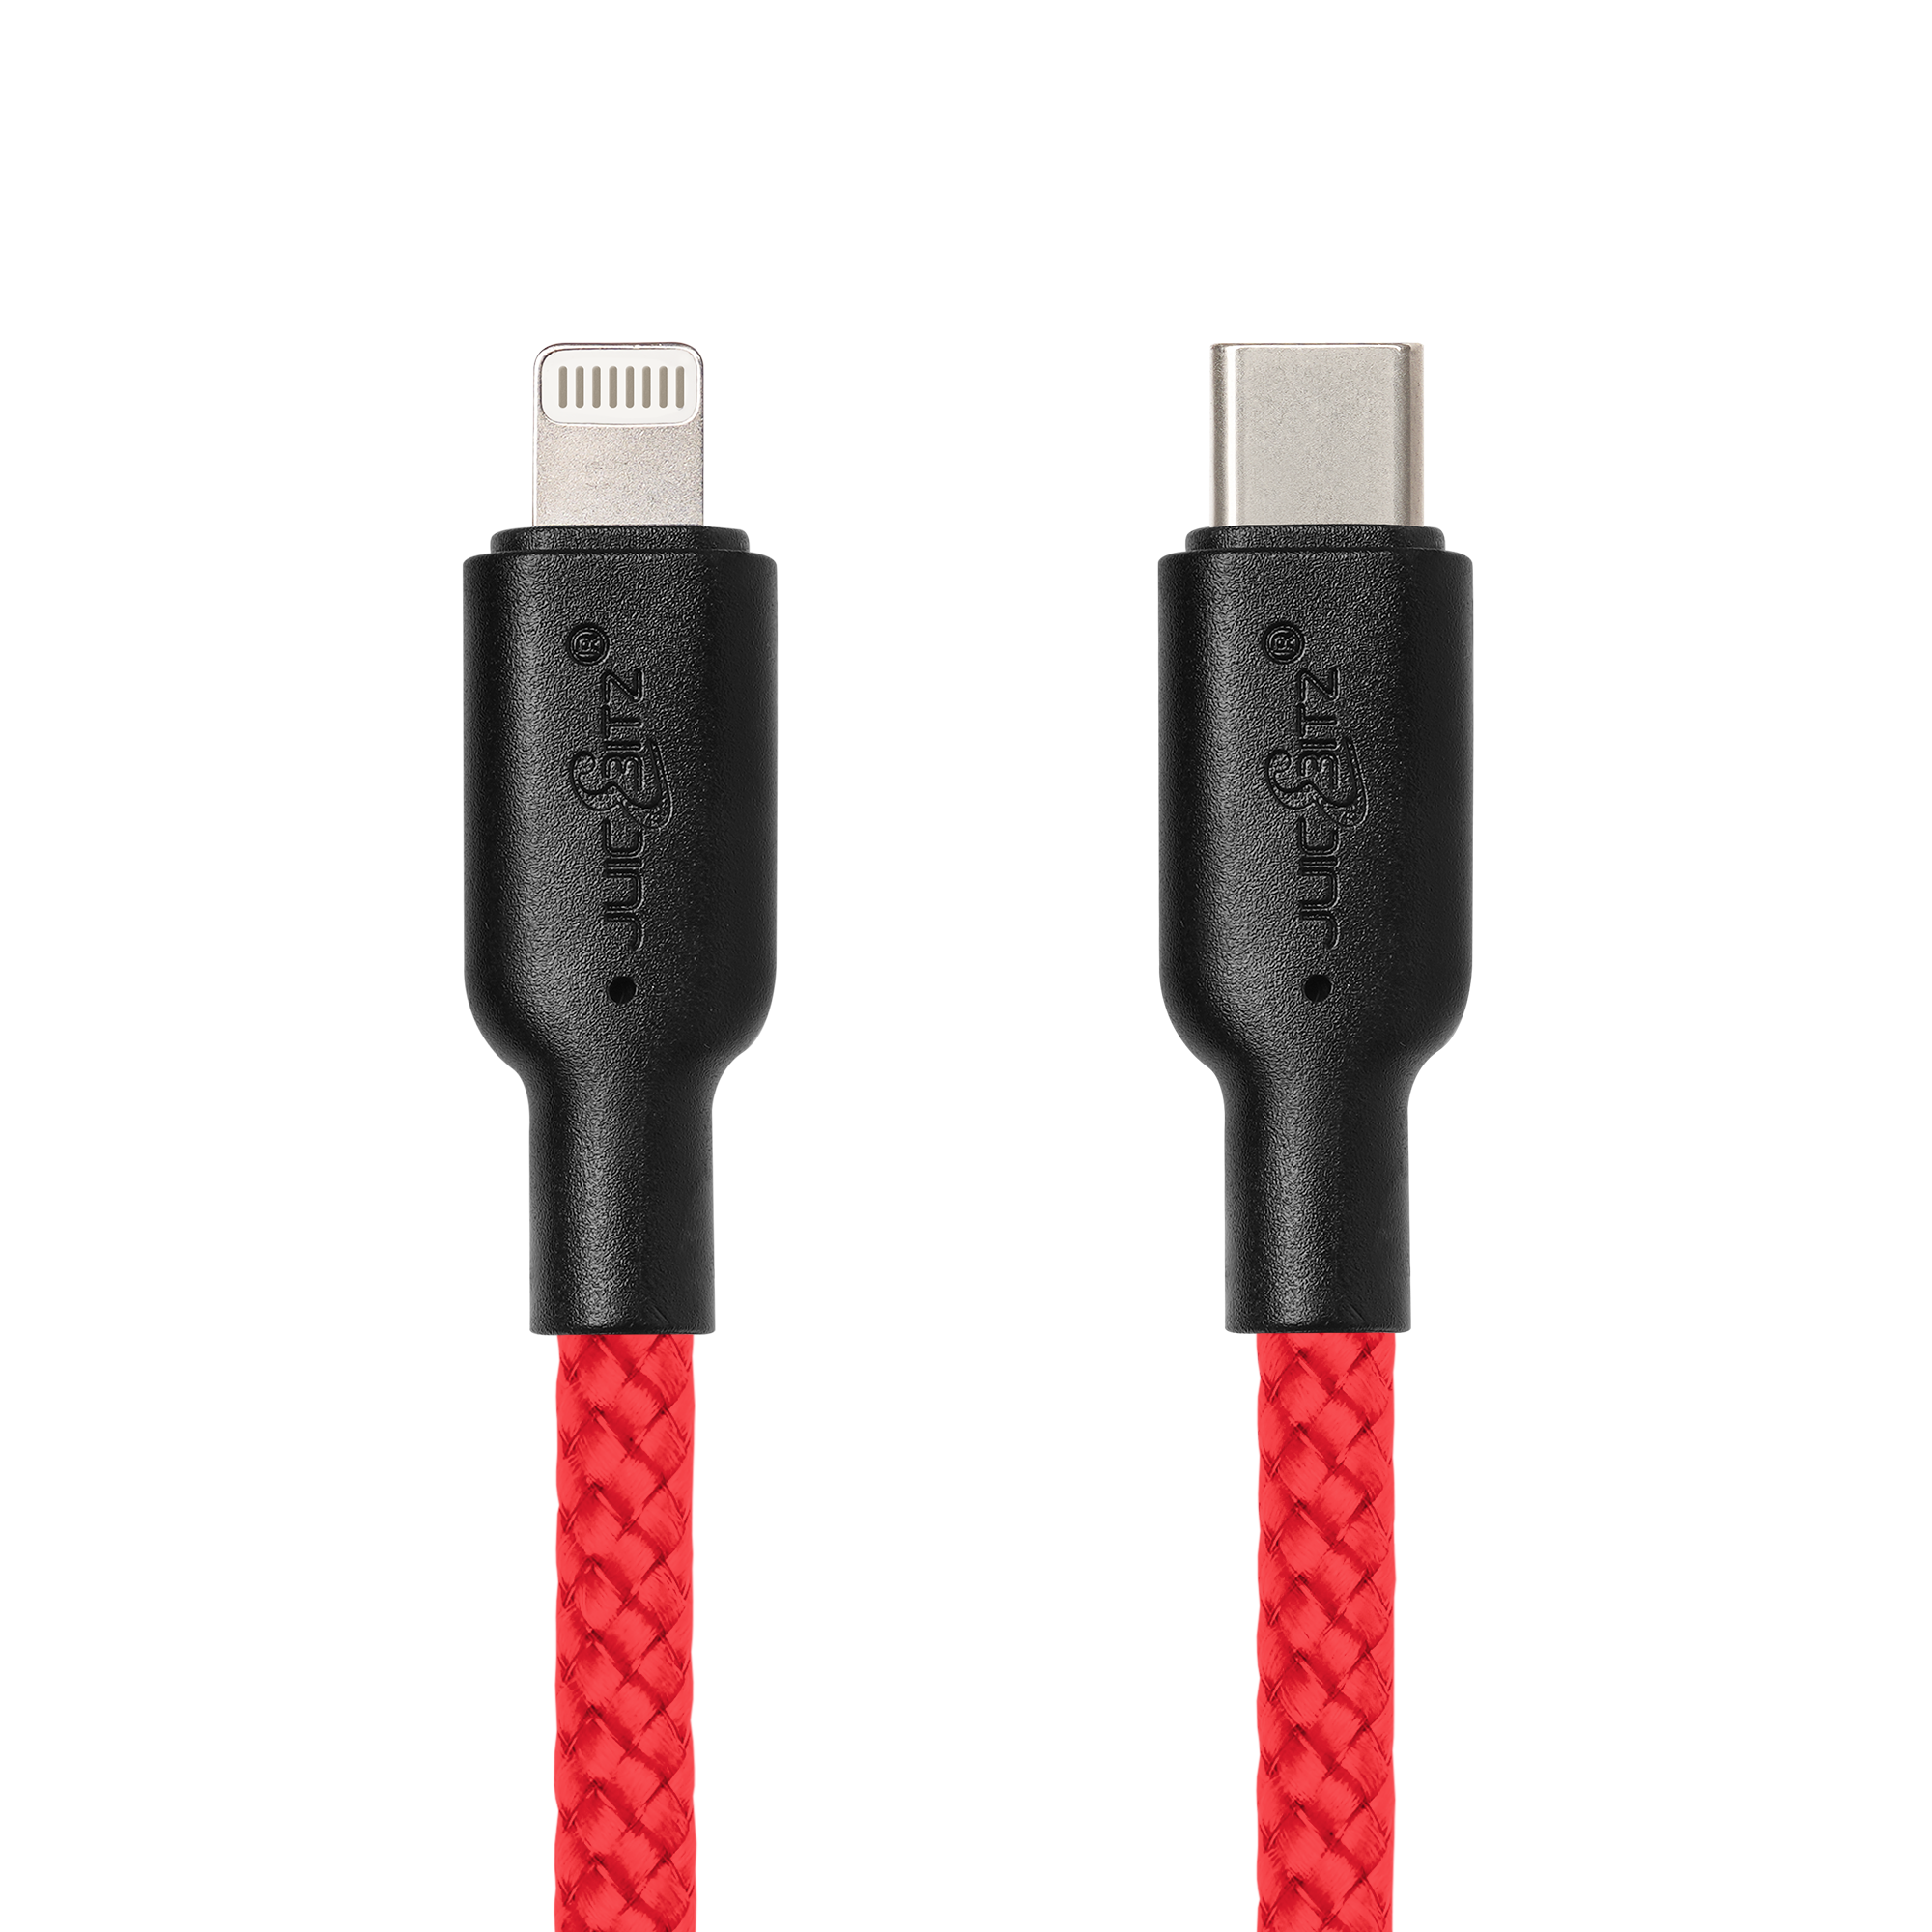 Braided Heavy Duty USB-C Fast Charger Data Sync Cable for iPhone, iPad, iPod - Red